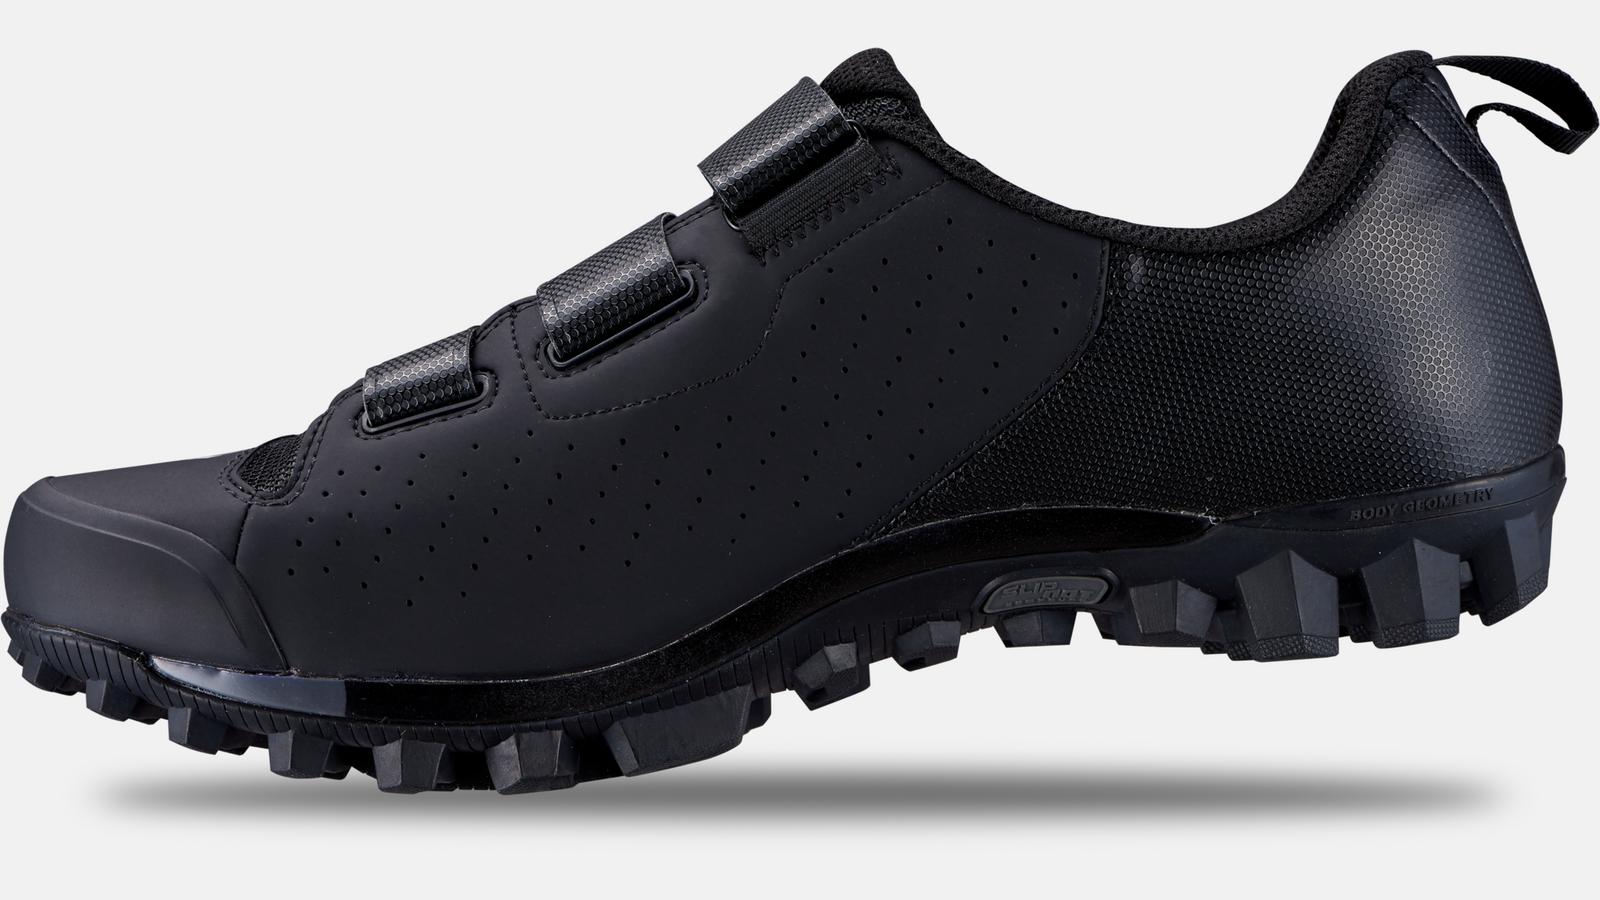 Recon 1.0 Mountain Bike Shoes | Specialized.com